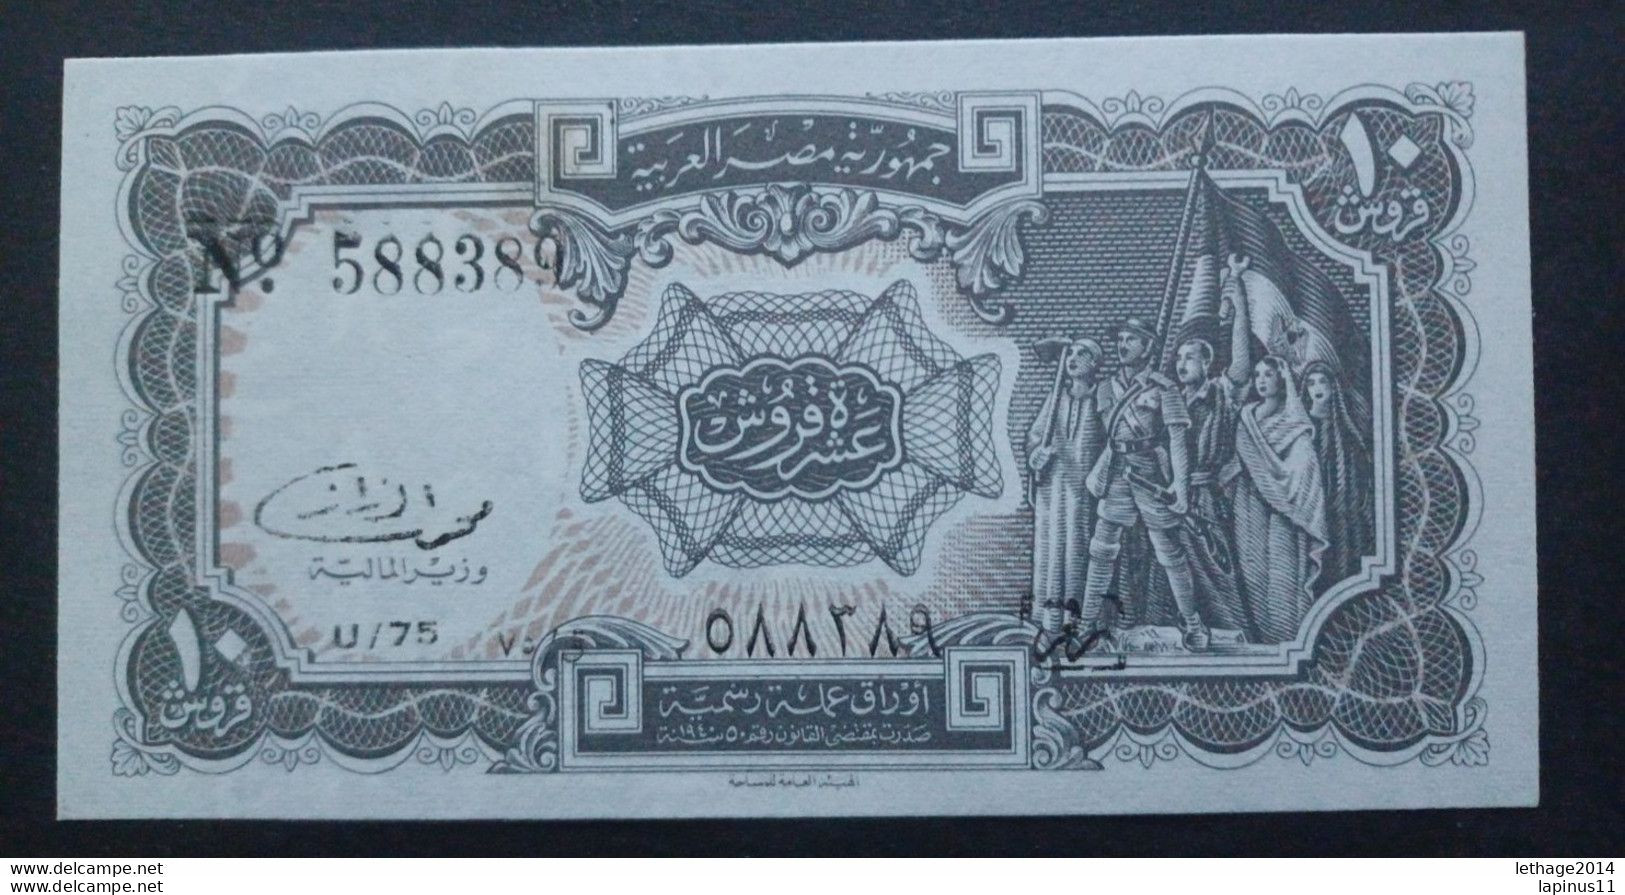 BANKNOTE EGYPT مصر EGYPT 10 PIASTRES 1952 UNCIRCULATED ERROR PRINT - Egypte